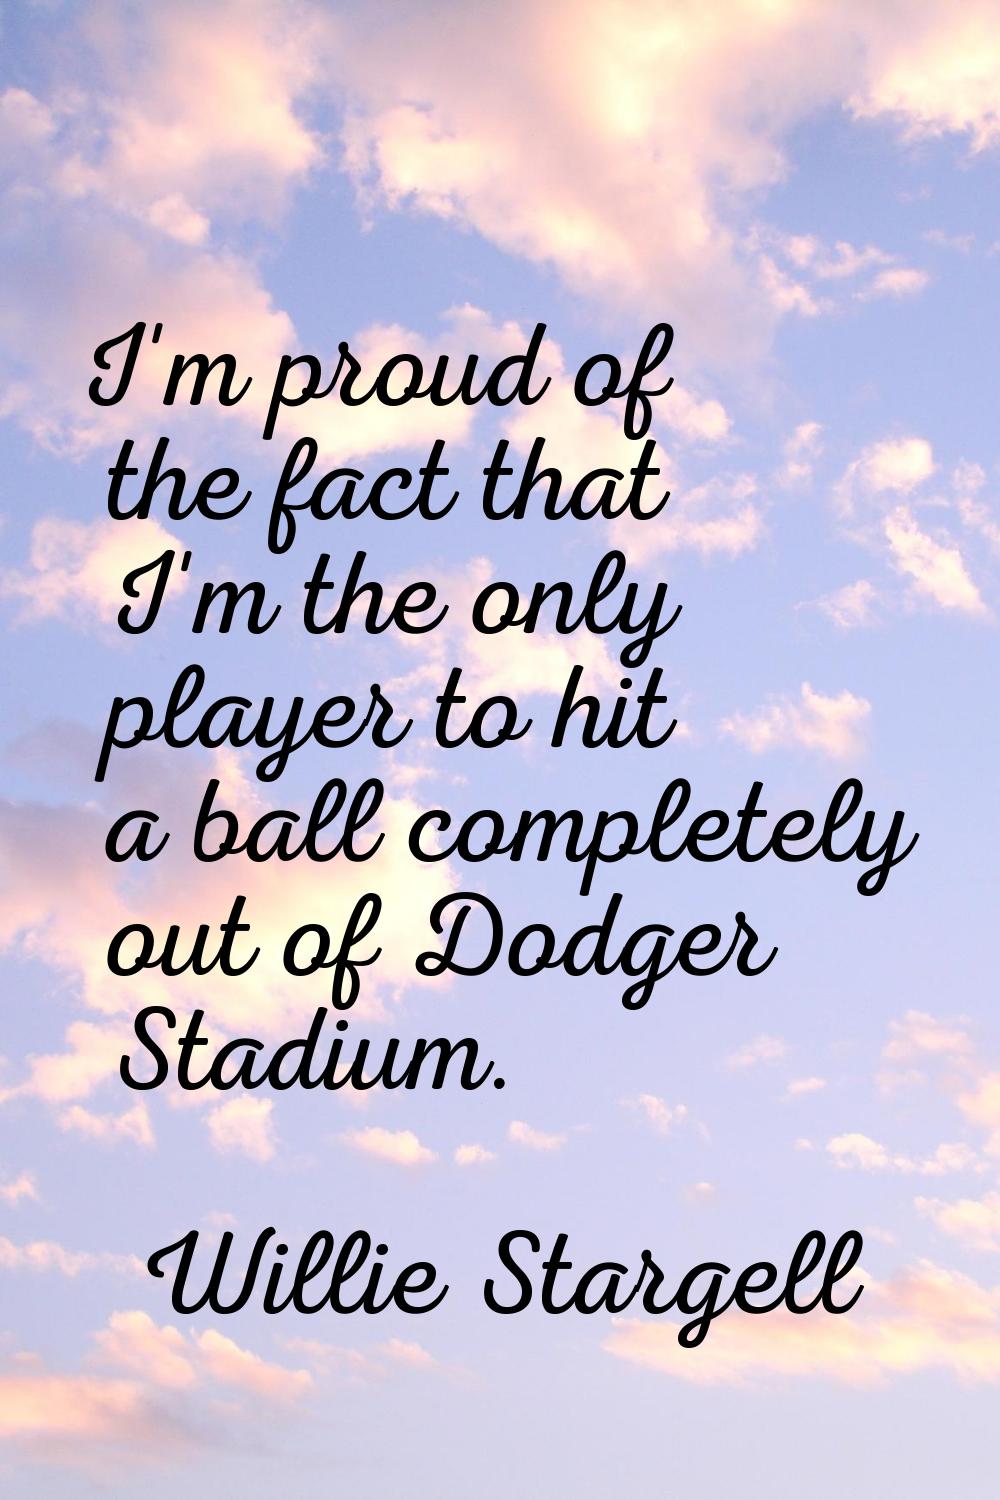 I'm proud of the fact that I'm the only player to hit a ball completely out of Dodger Stadium.